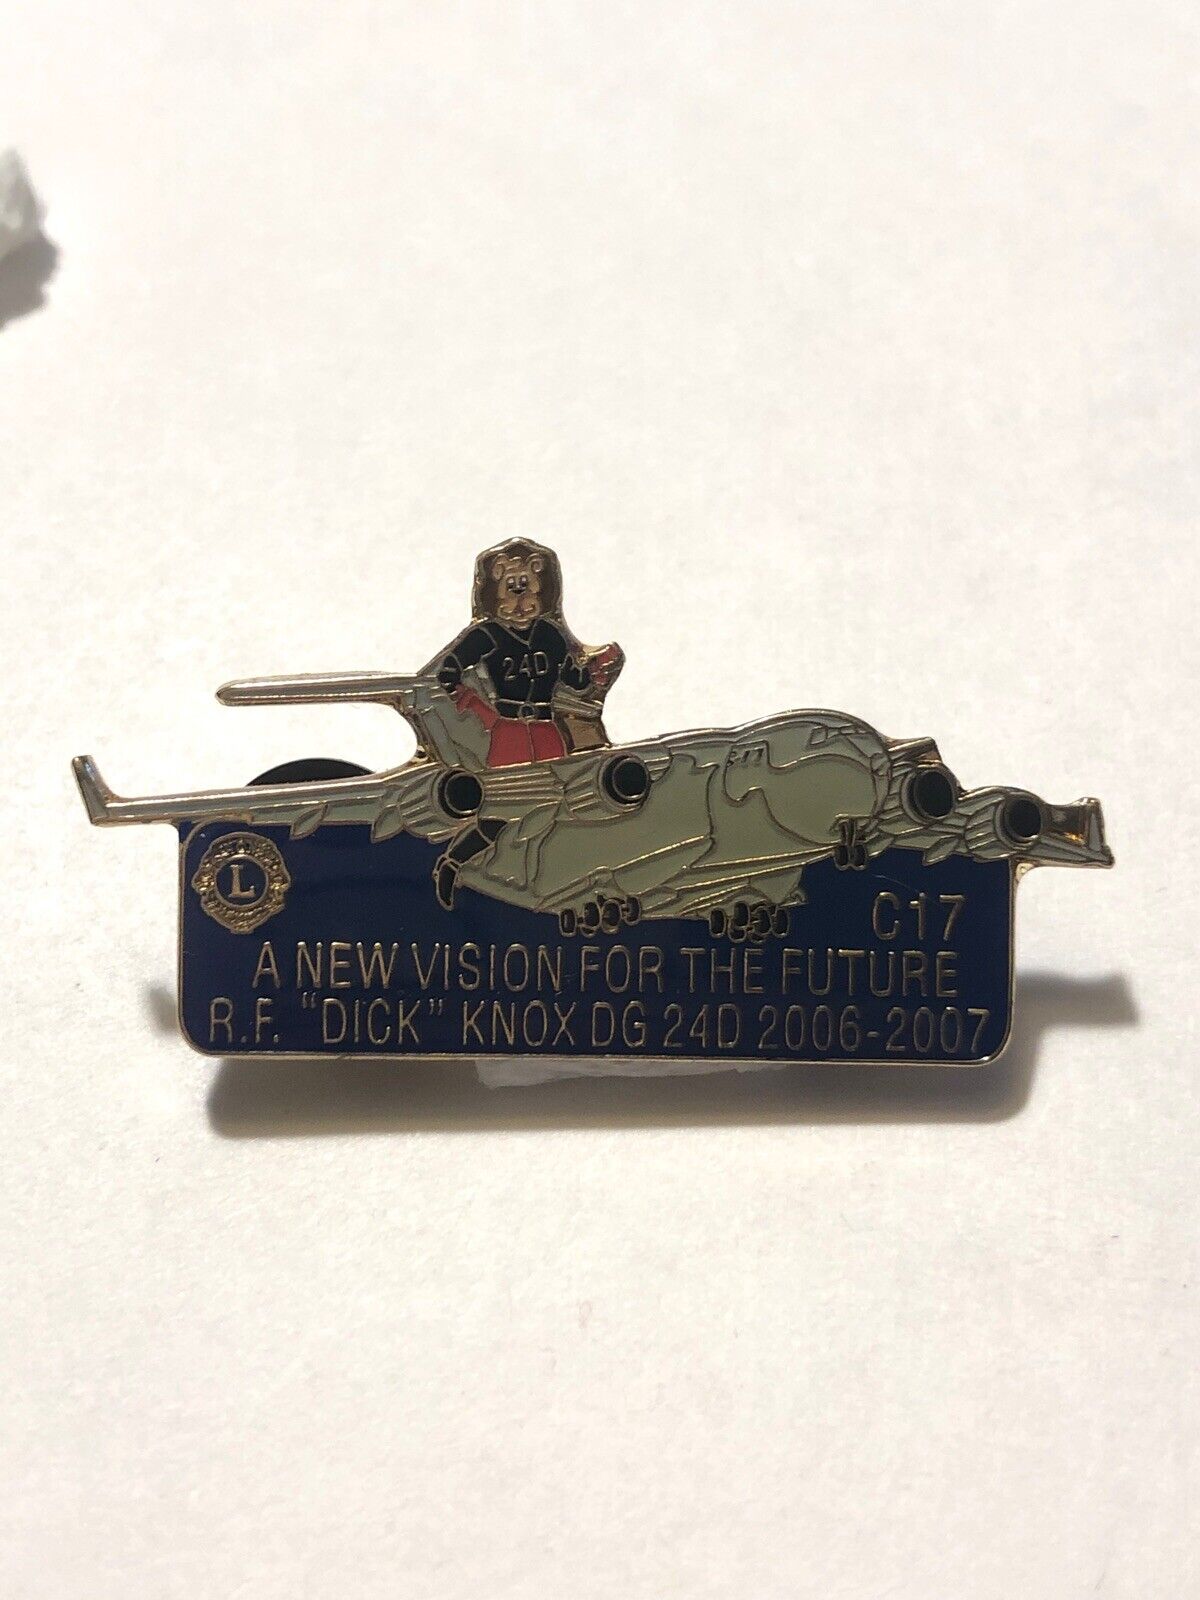 2007 24D R.F. “Dick” Knox DG C17 Plane A New Vision For Future Lions Club Pin